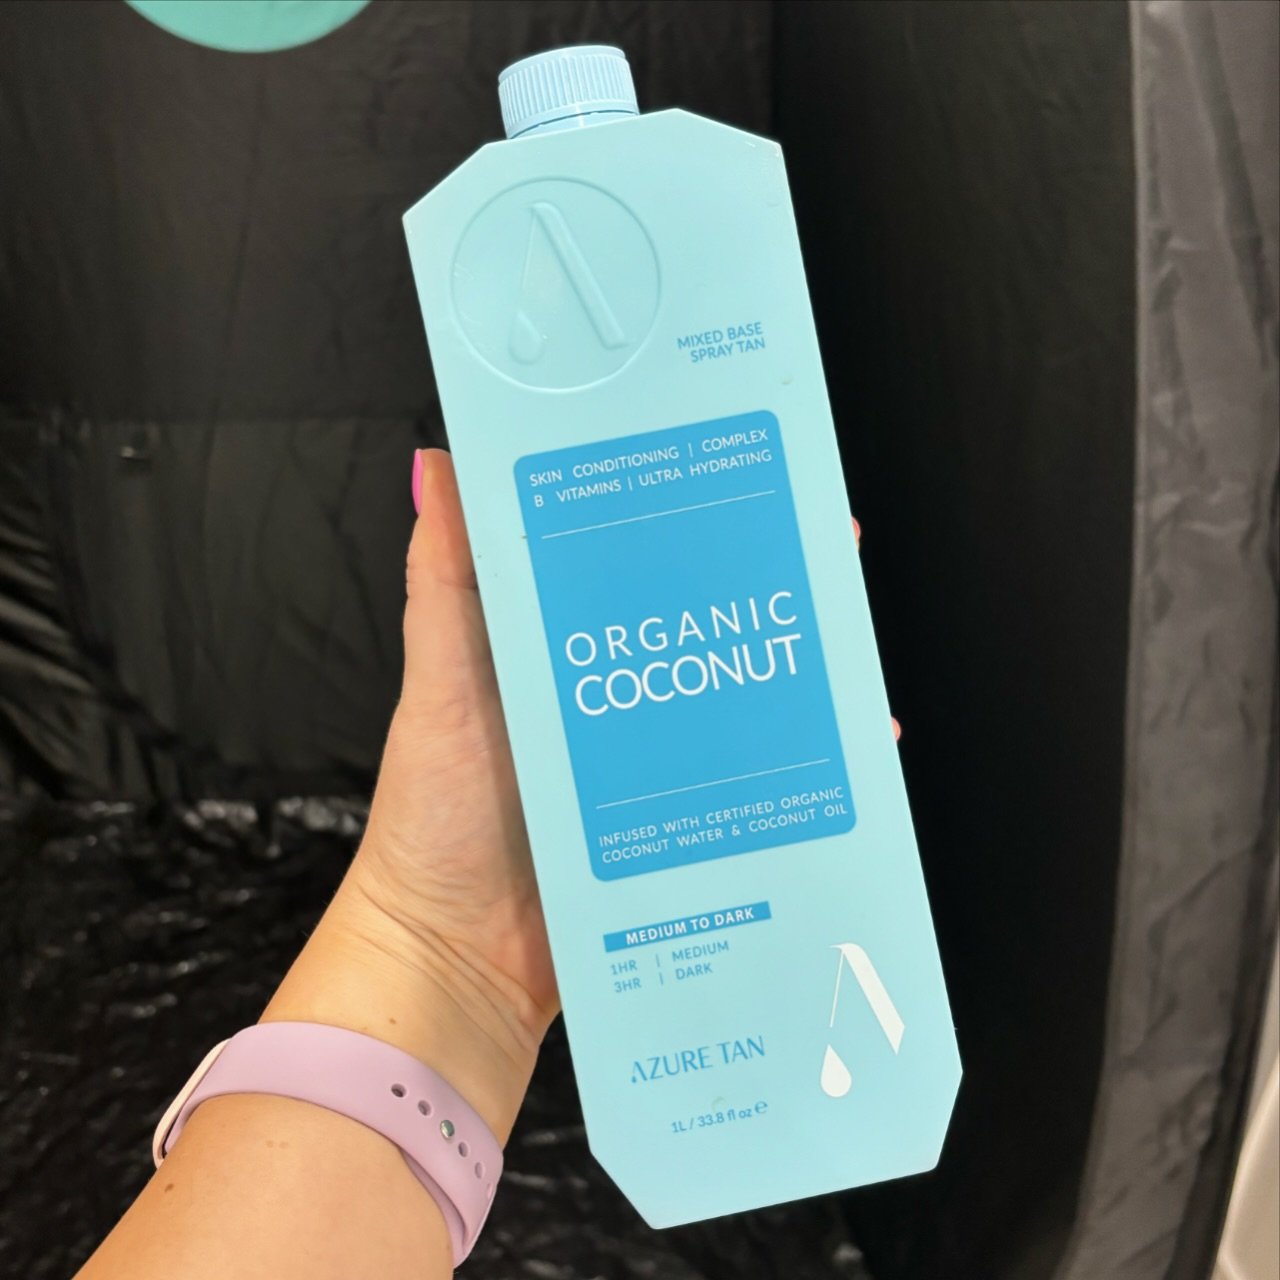 By far our most popular spray tan solution in the salon! 💦 🥥 

The organic coconut solution is a skin conditioning formula infused with certified organic coconut water &amp; coconut oil. No need to worry about the tan clinging to any dry patches! S